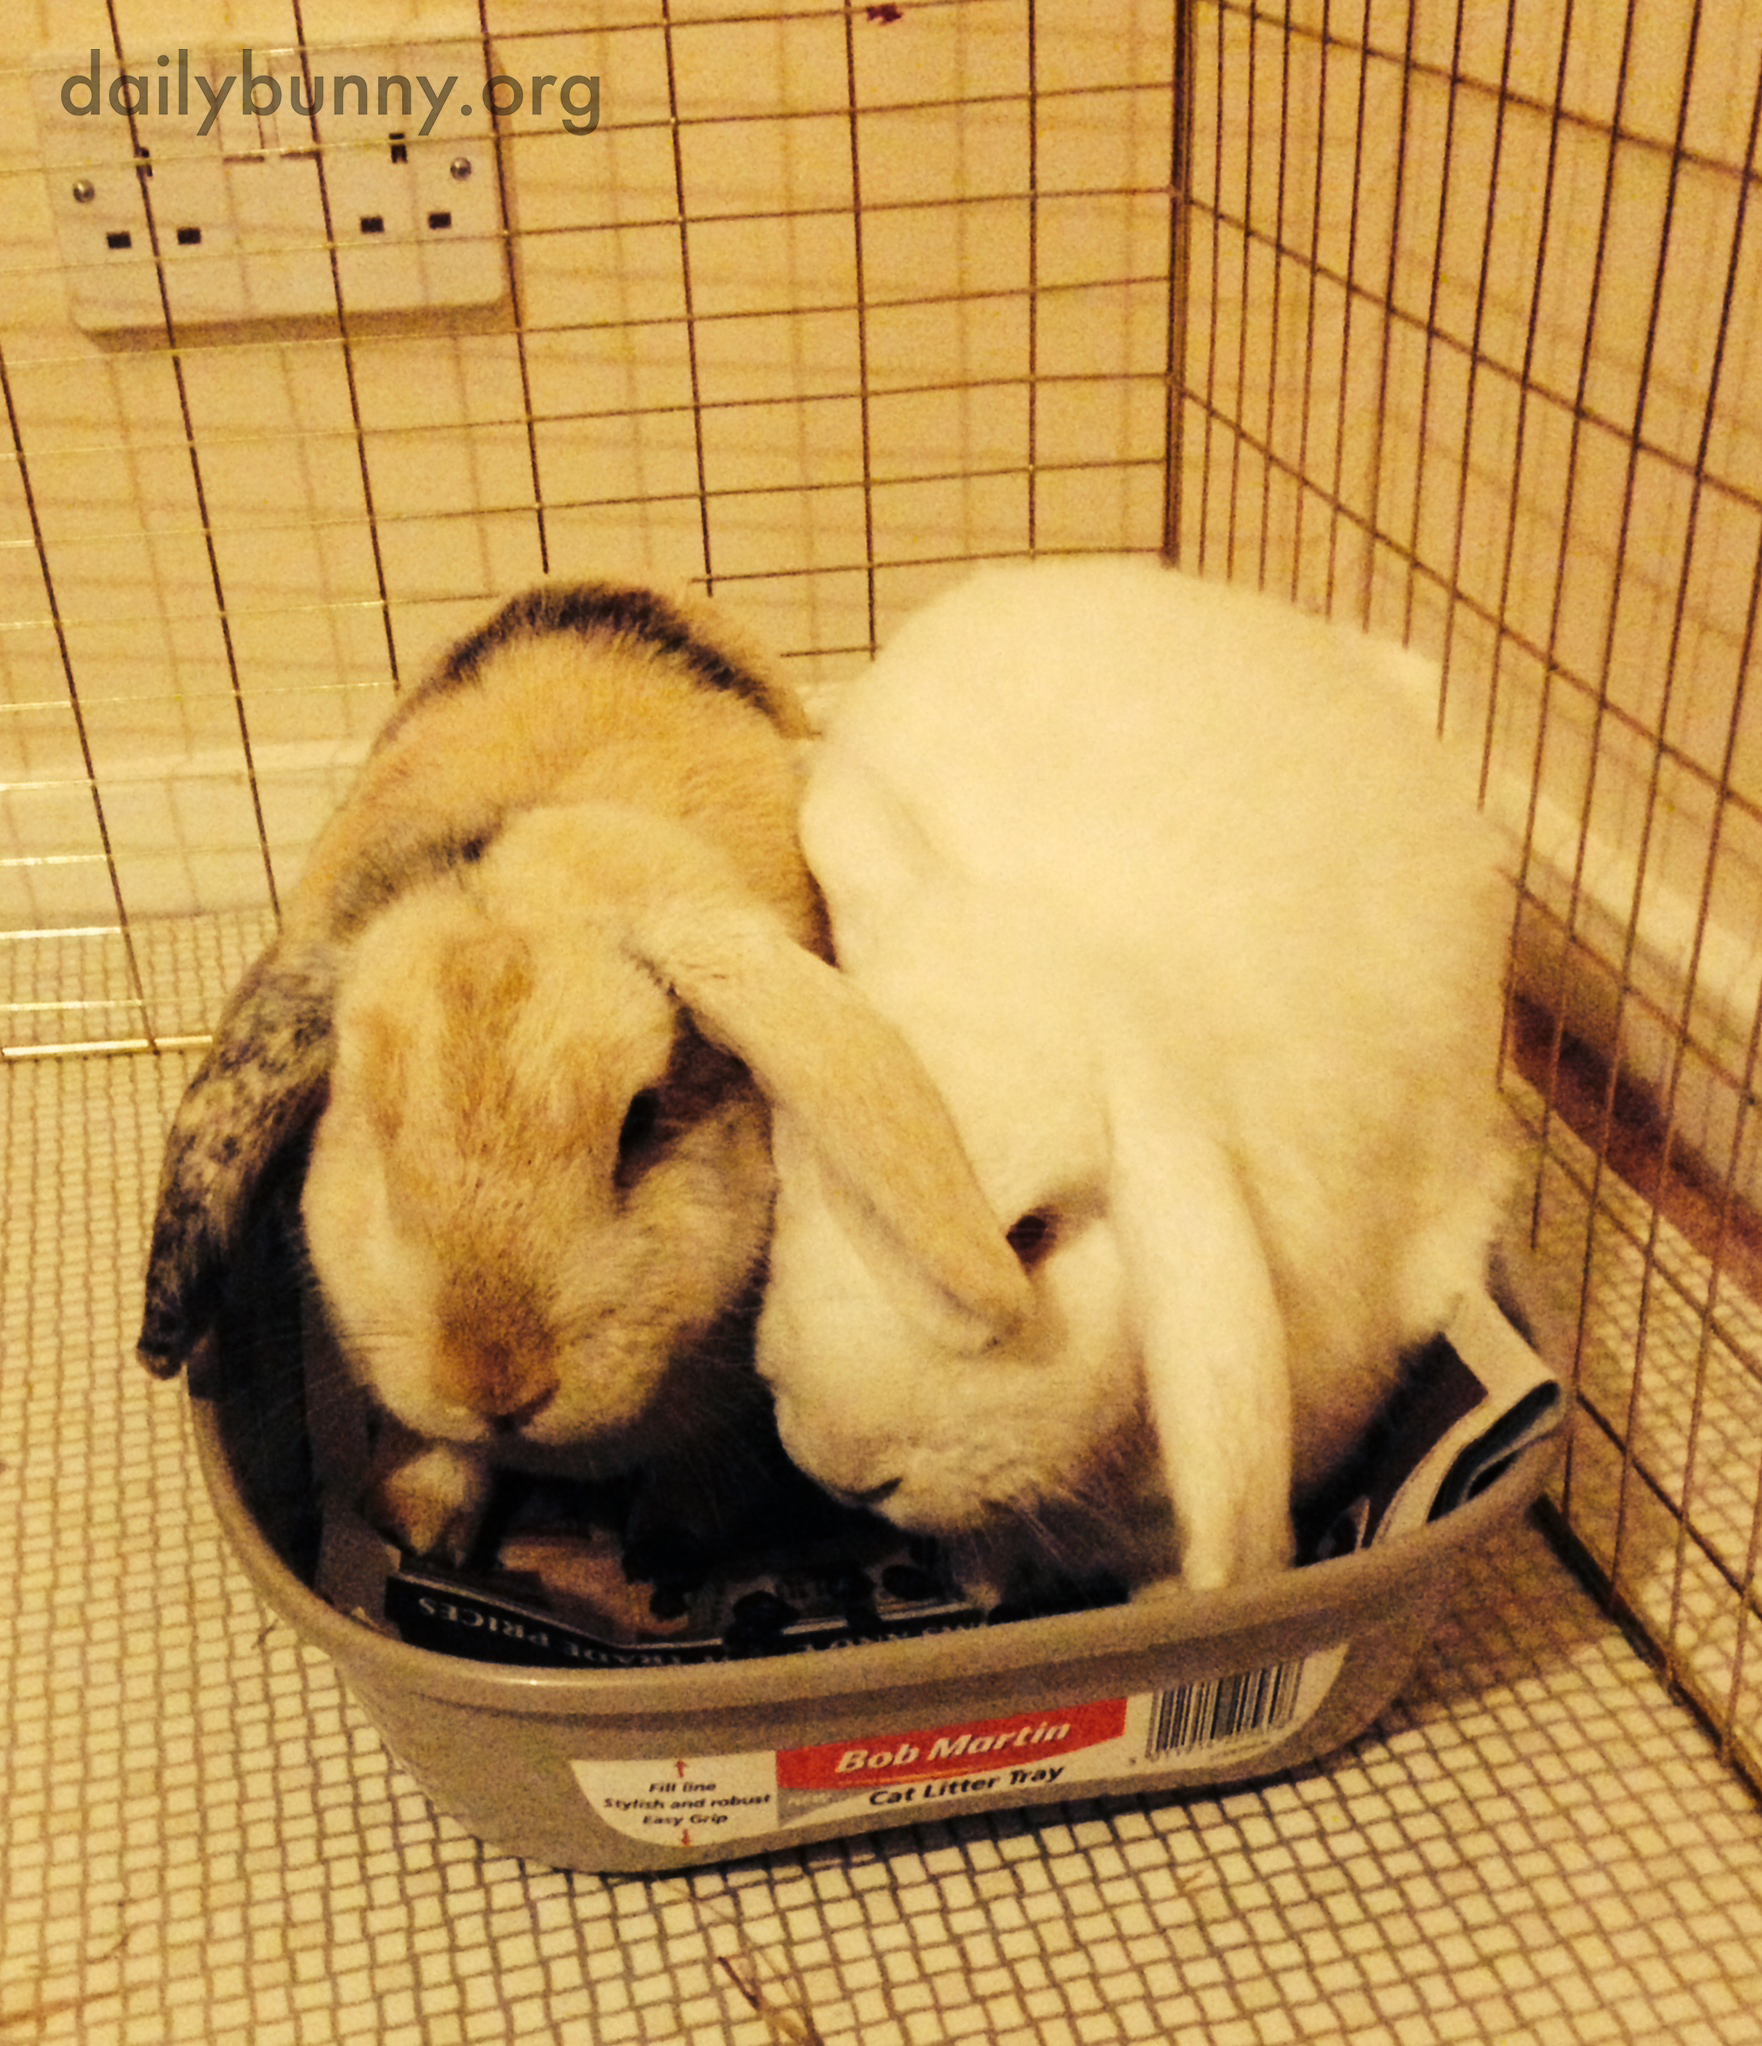 Reunited Bunnies Don't Leave Each Other's Side Even to Use the Litterbox